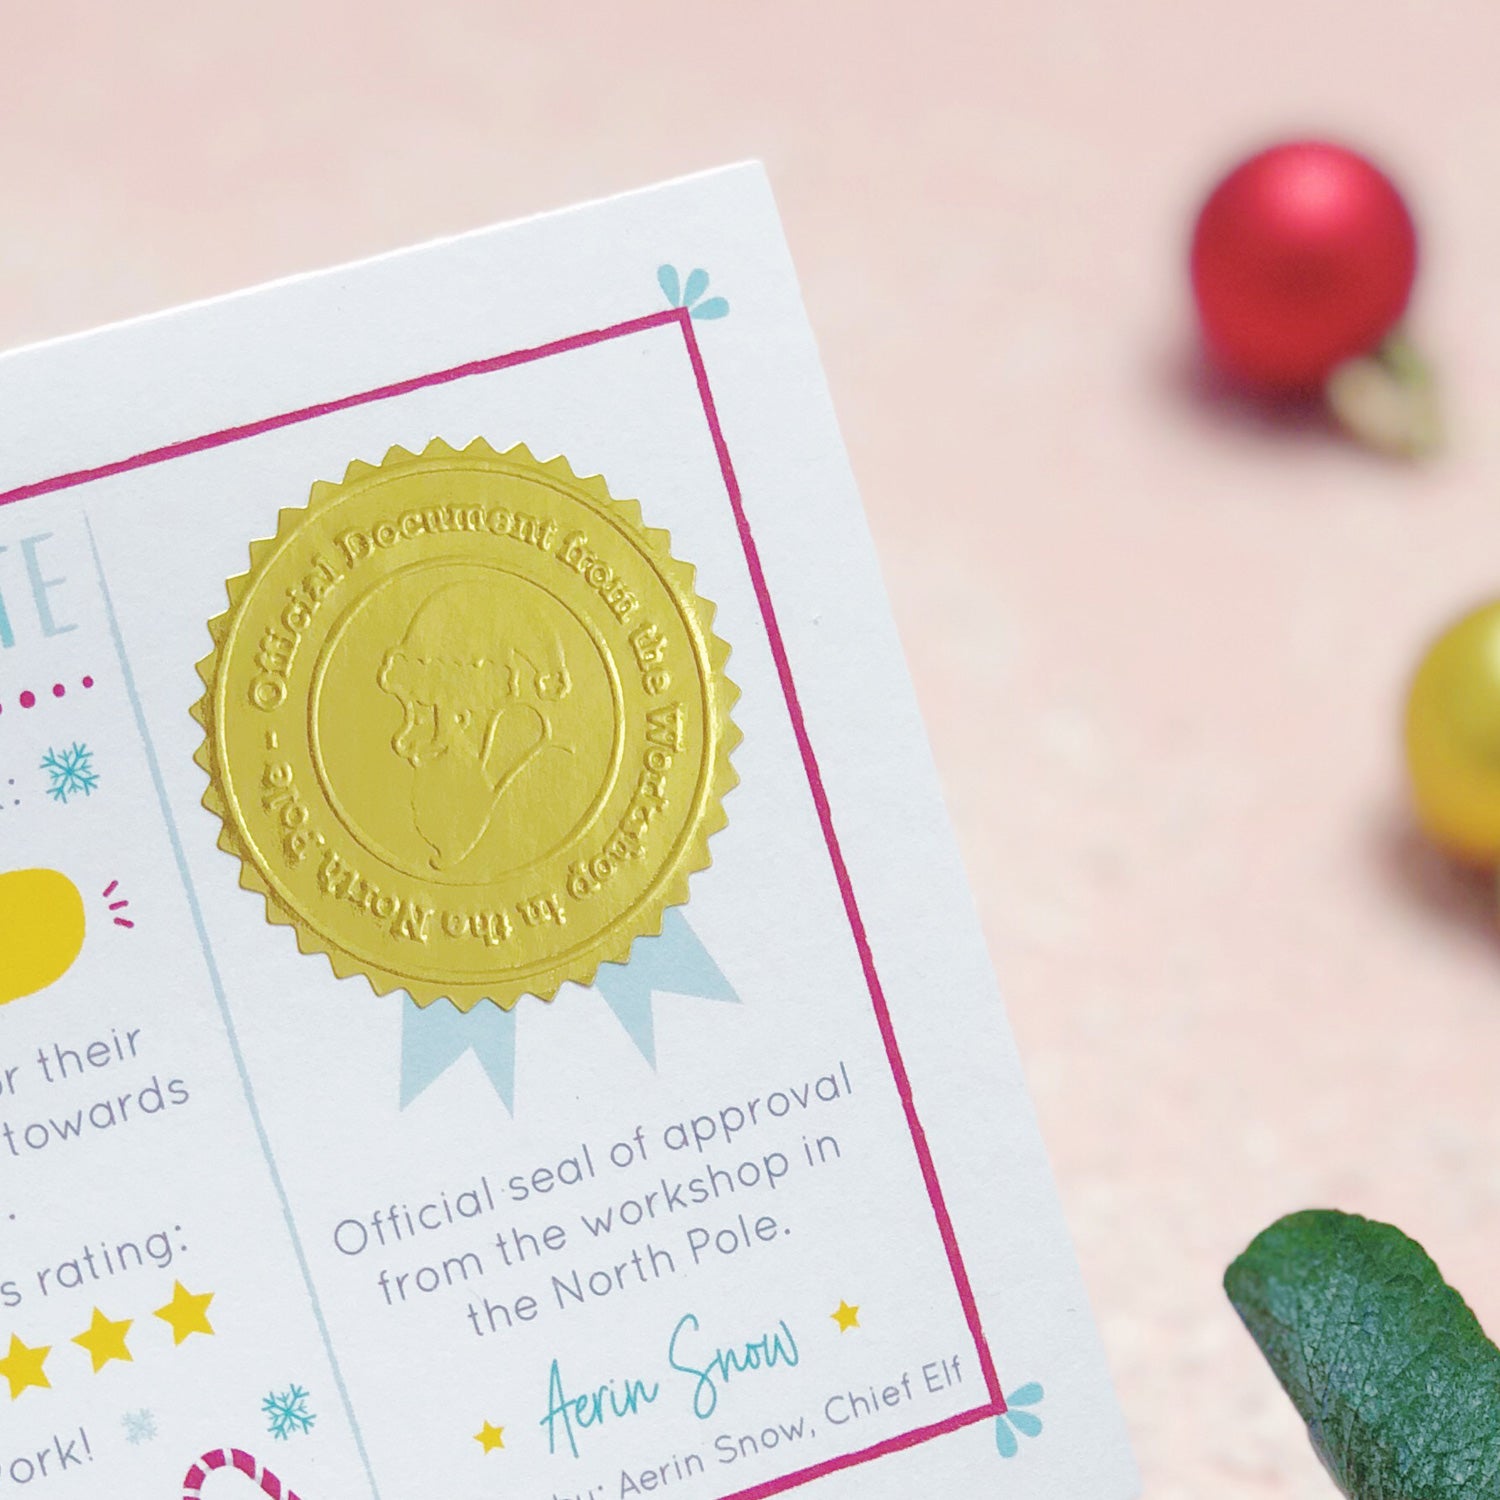 A close up of the shiny gold Christmas stamp. The stamp reads "Official document from the workshop in the north pole". Shot over a pink background with baubles and green foliage.